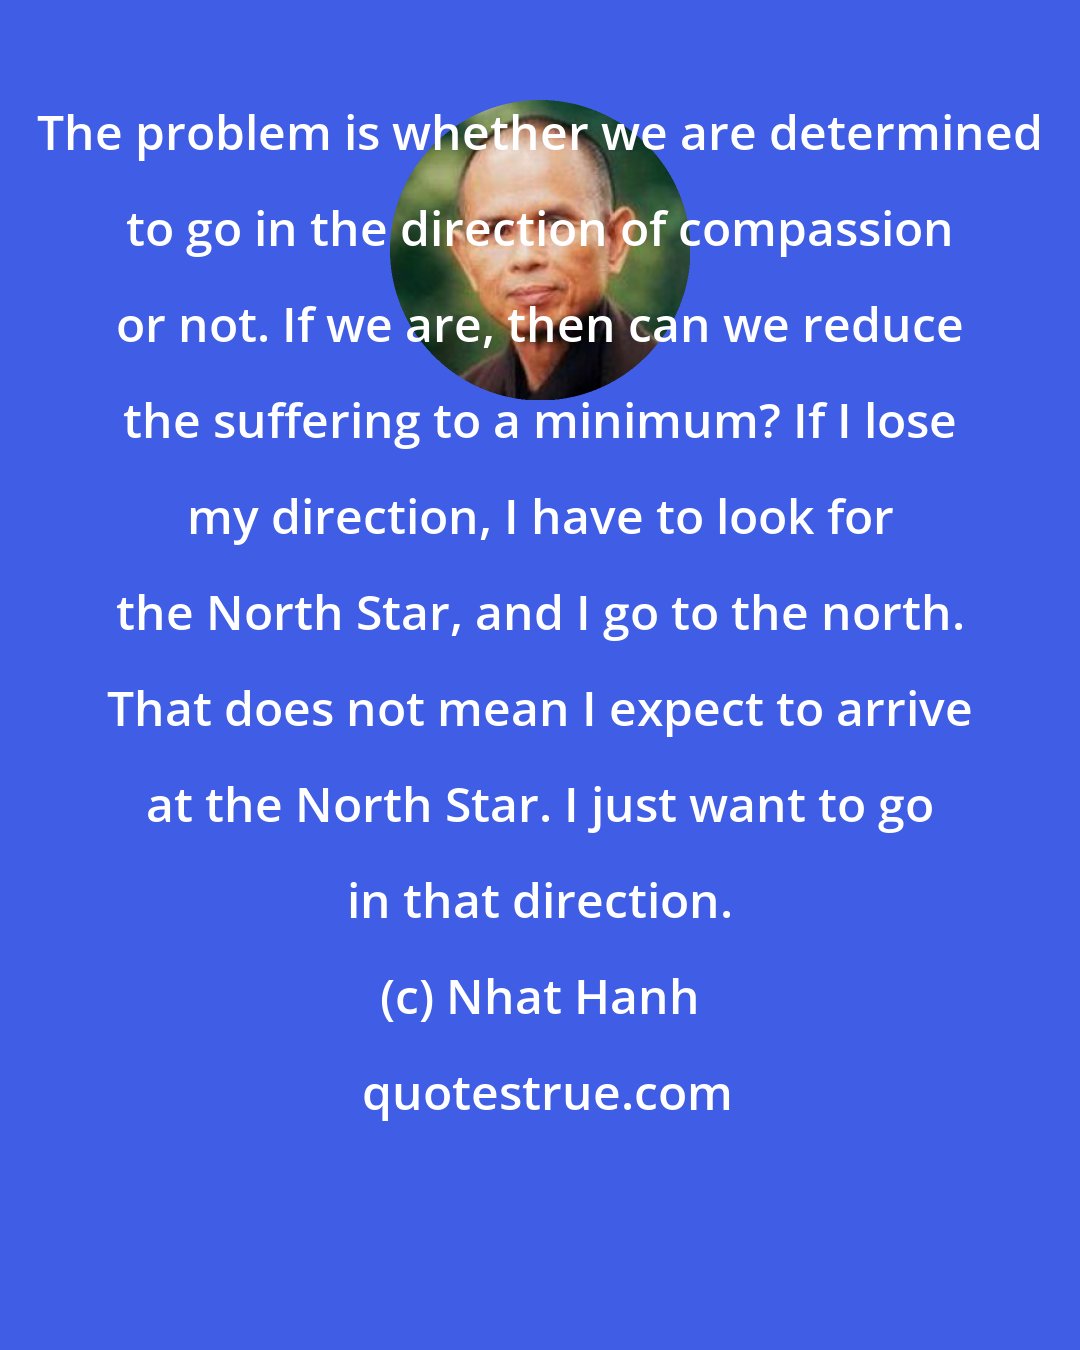 Nhat Hanh: The problem is whether we are determined to go in the direction of compassion or not. If we are, then can we reduce the suffering to a minimum? If I lose my direction, I have to look for the North Star, and I go to the north. That does not mean I expect to arrive at the North Star. I just want to go in that direction.